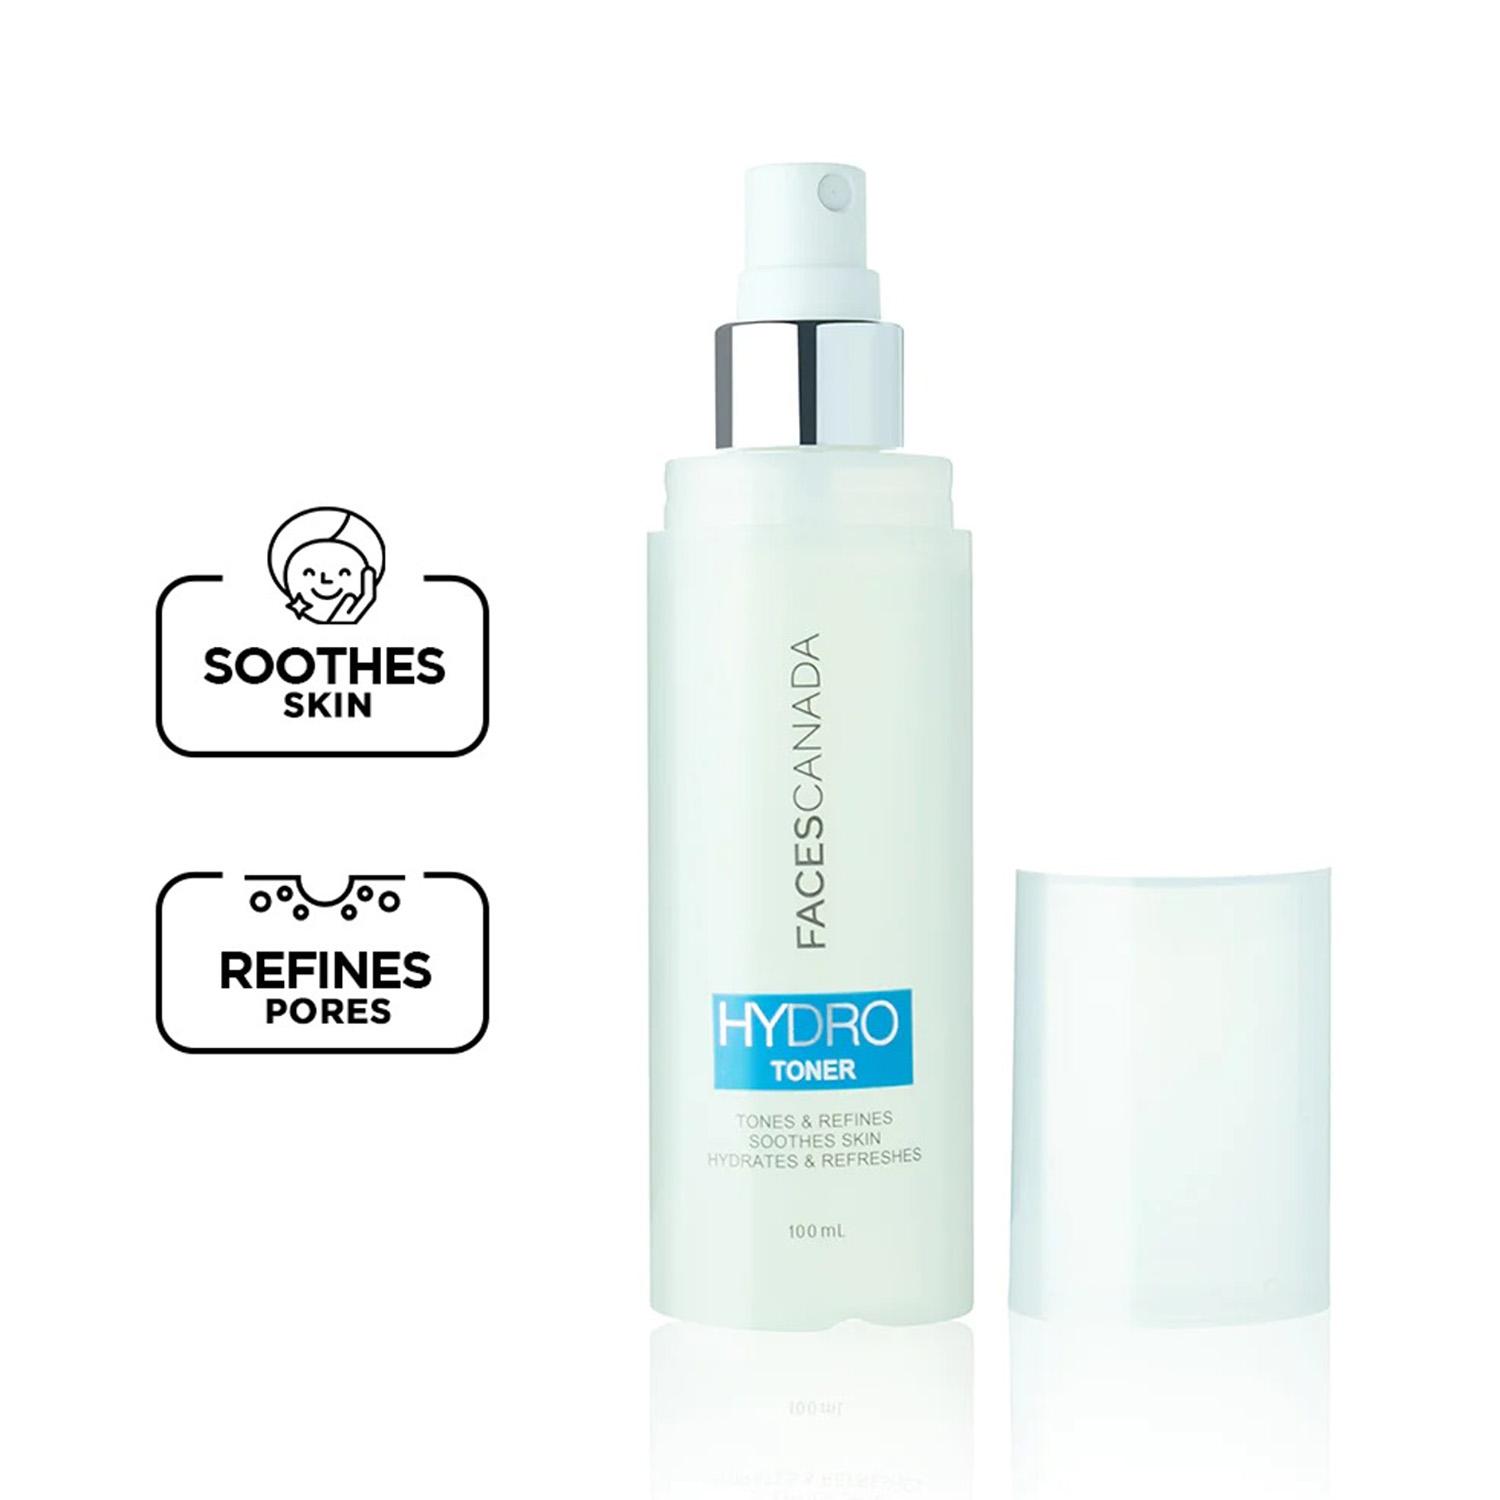 Faces Canada | Faces Canada Hydro Gentle Toner, Soothes, Tones & Refines Skin For Smooth & Supple Look (100 ml)